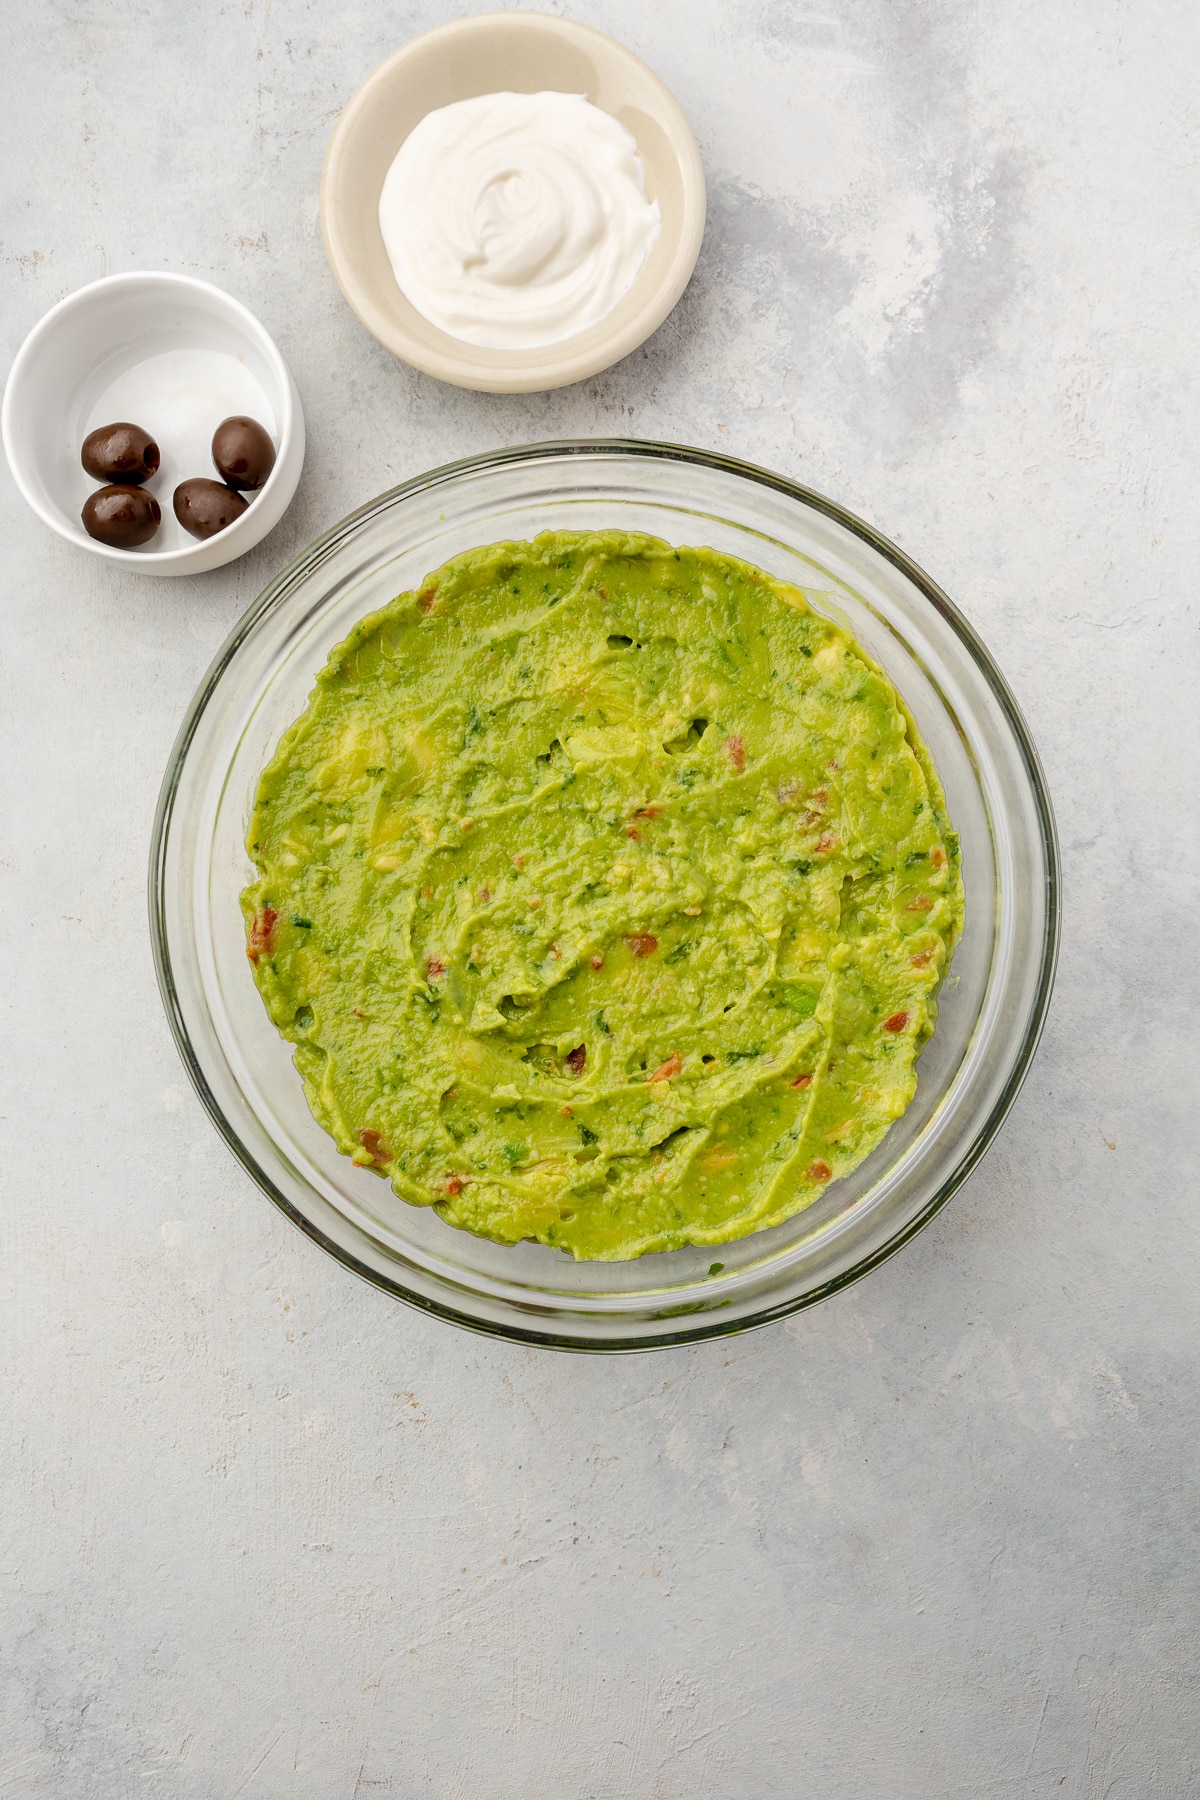 A large bowl of layered hummus, shredded cheese, pico de gallo, and guacamole (for 7 layer dip) surrounded by smaller bowls of black olives and sour cream.